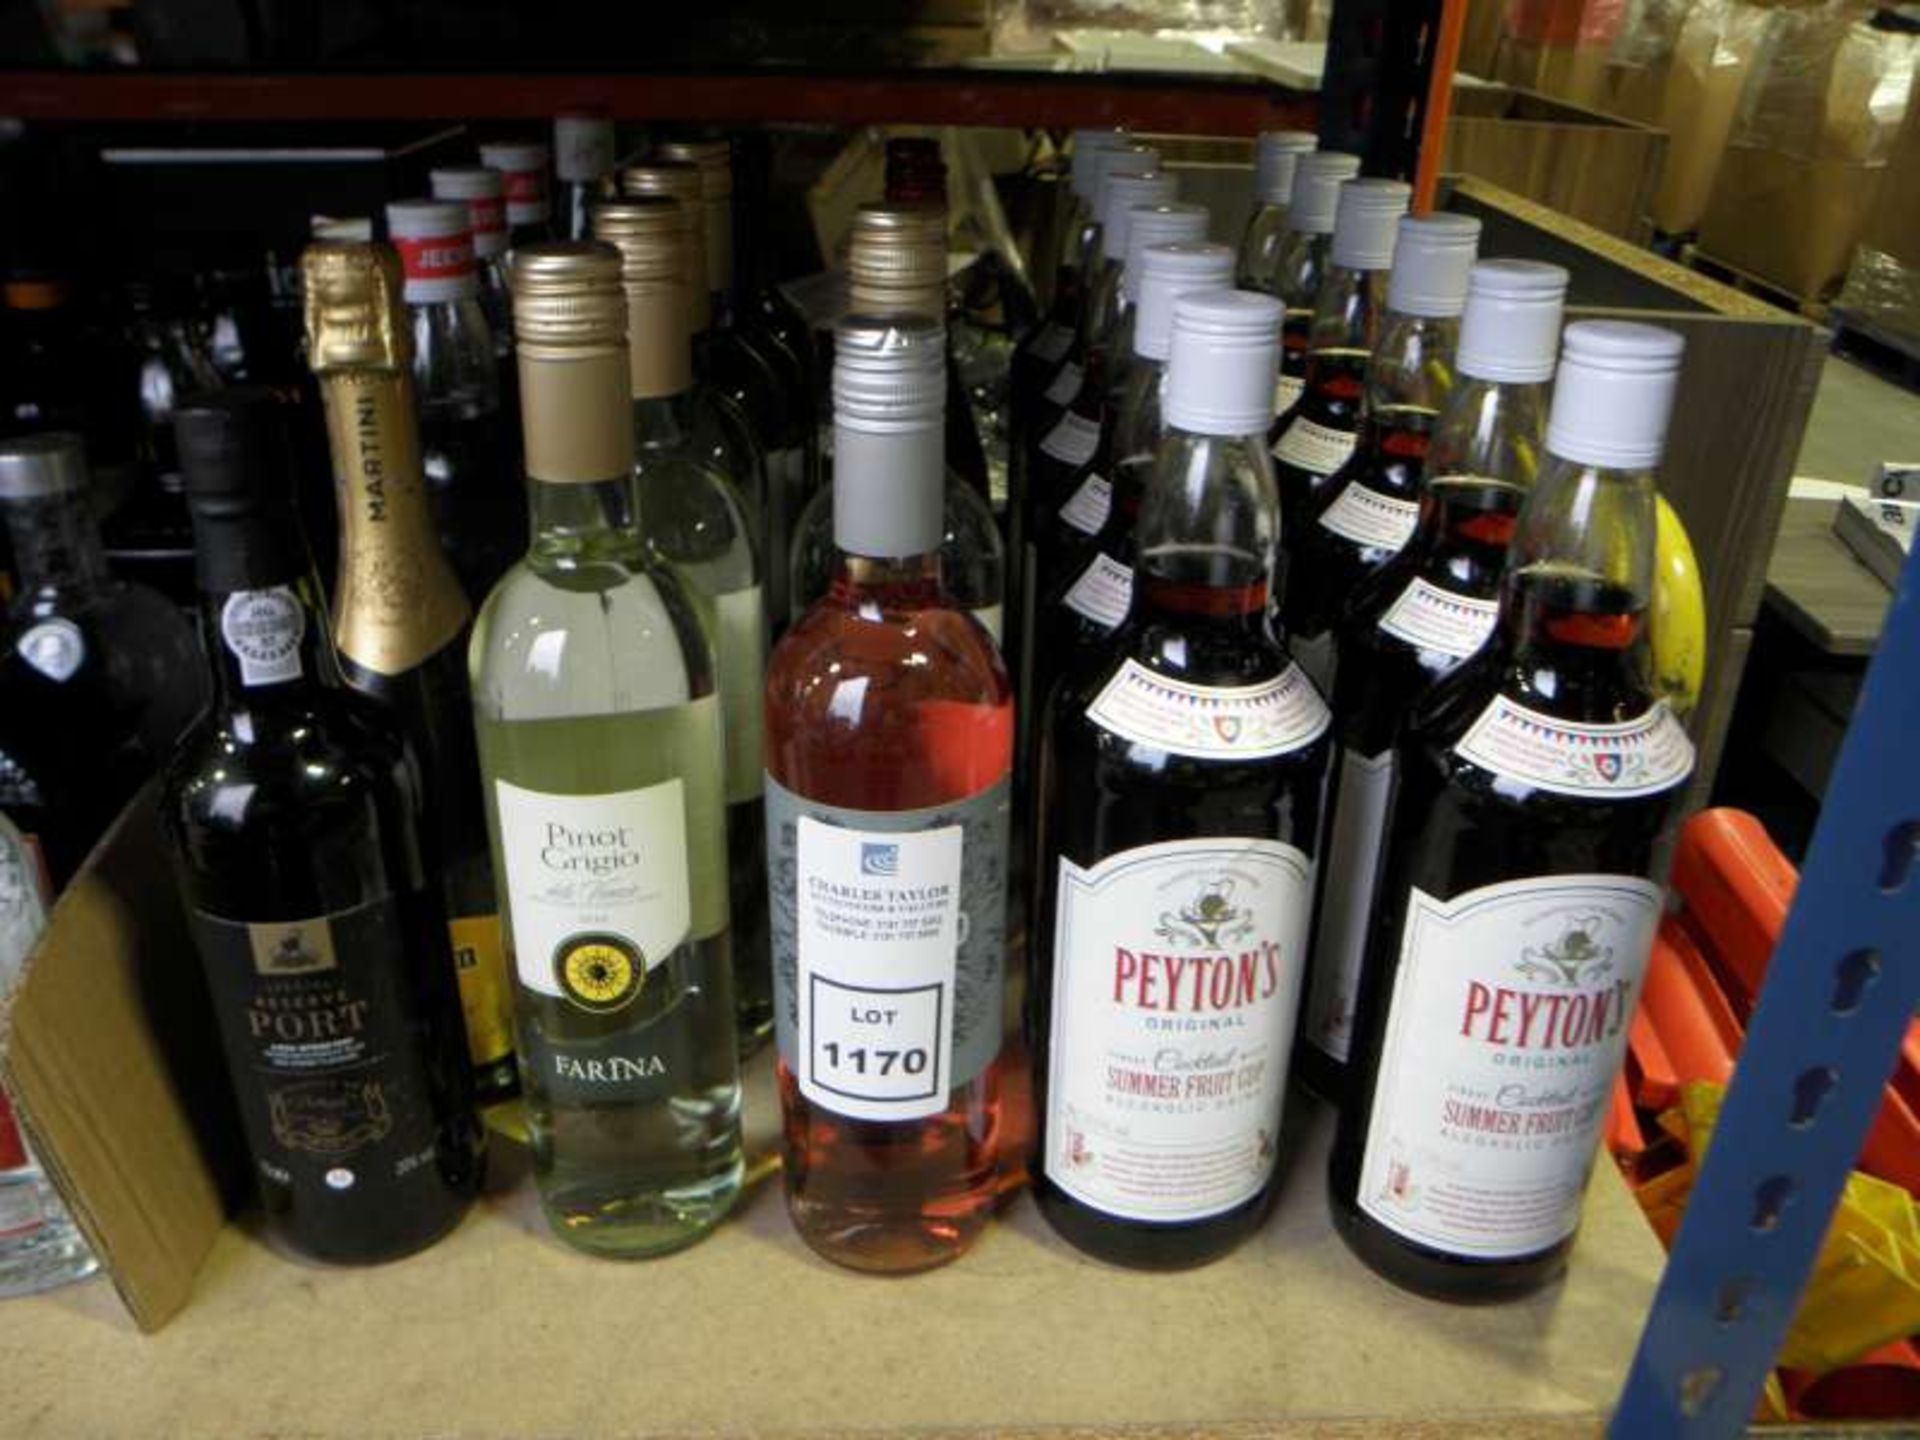 LOT CONTAINING 12 X 1 LITRE BOTTLES OF PEYTONS SUMMER FRUITS, 13 X BOTTLES OF WINE, 1 X 75 CL BOTTLE